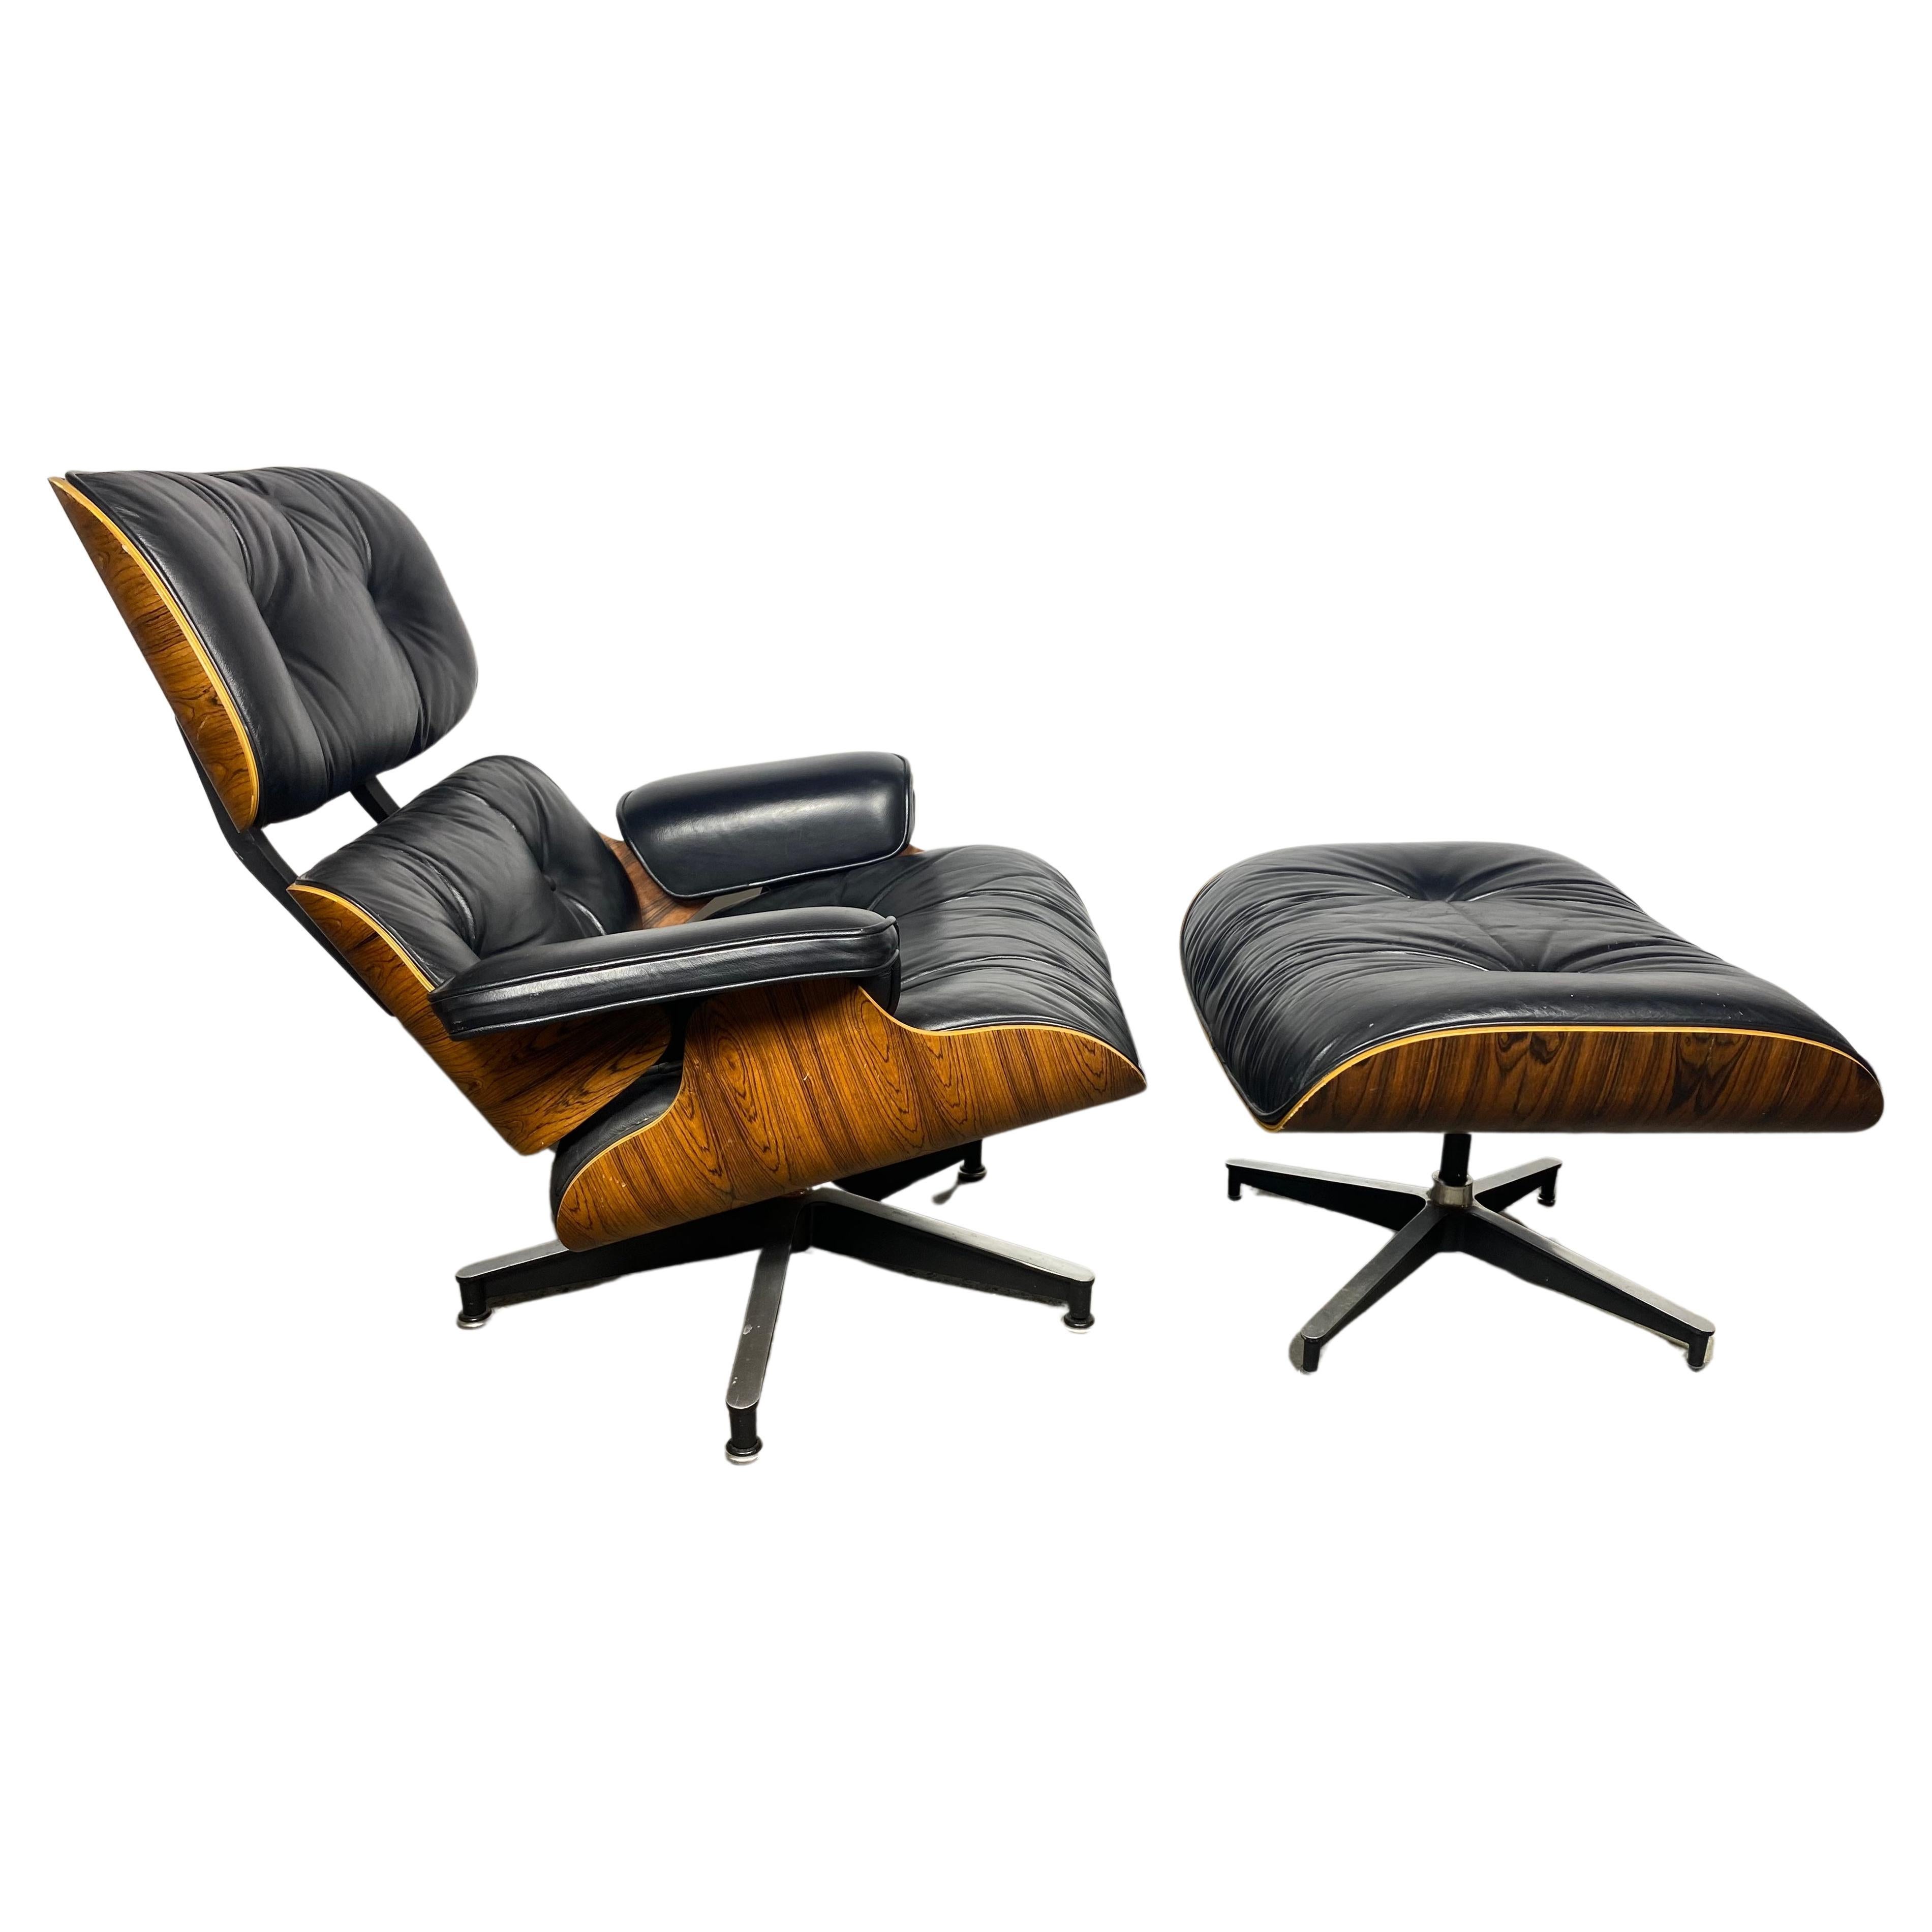 CLassic Brazilian Rosewood and Leather Eames Lounge Chair & Ott Herman Miller For Sale